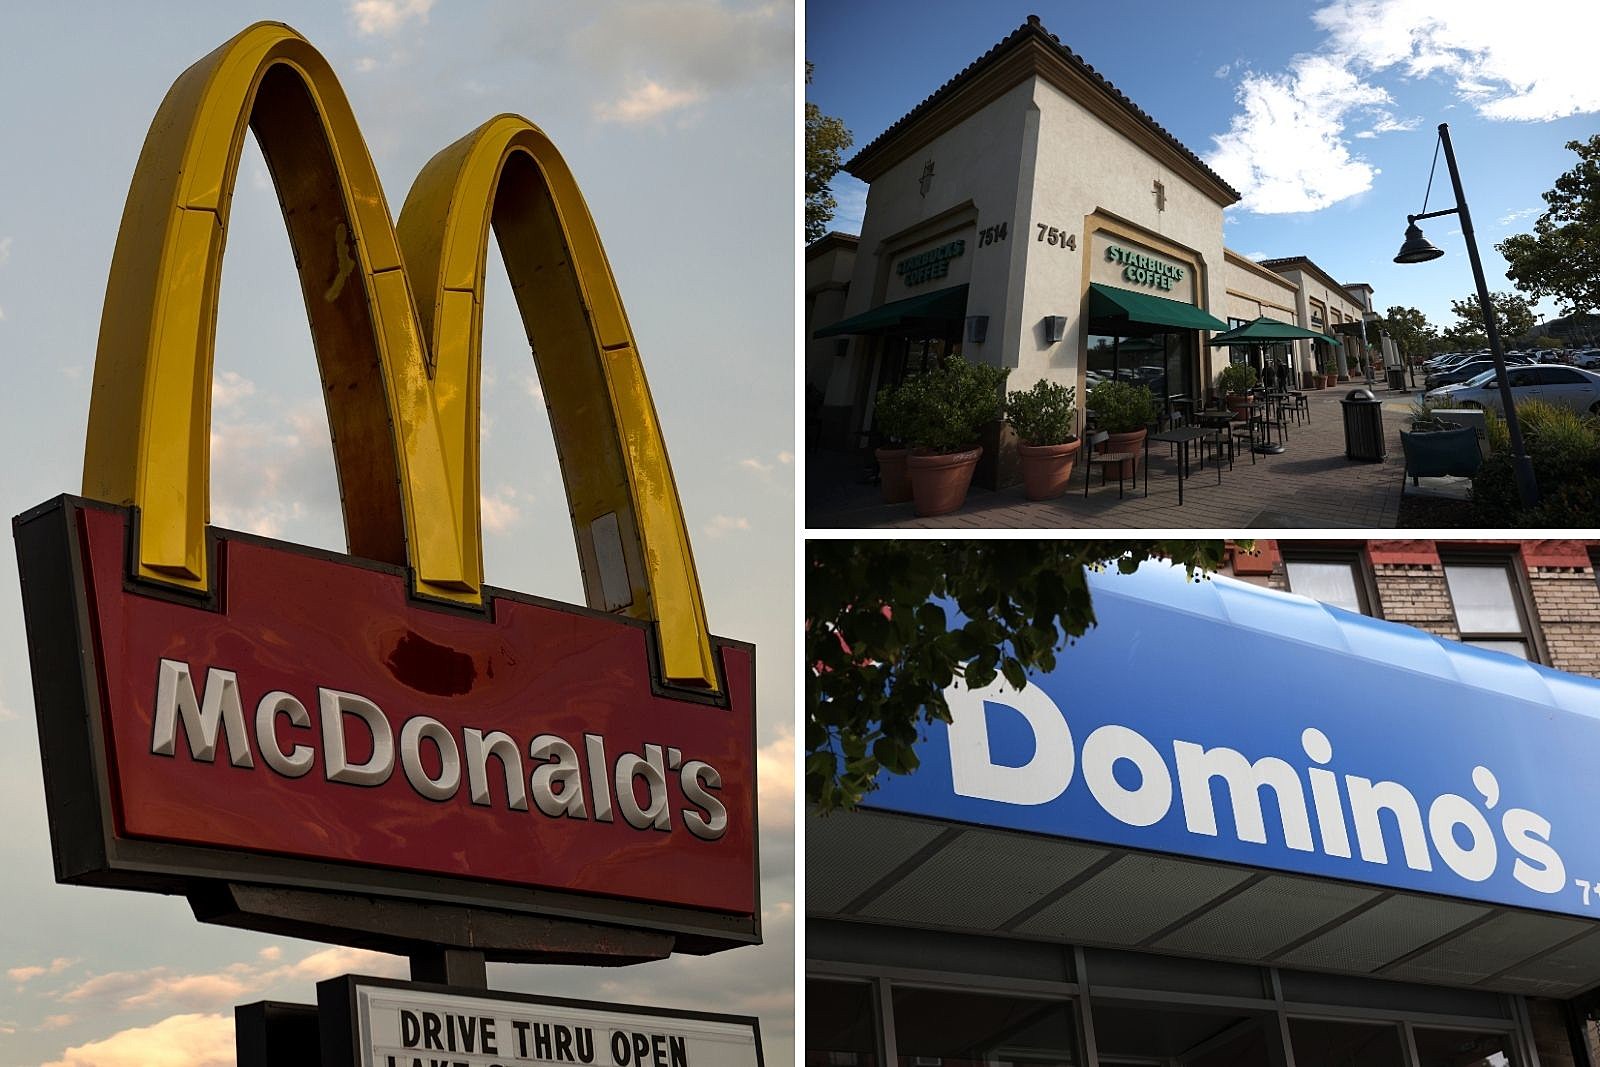 Where Did the Dollar Menu Go? Exploring Fast Food Shifts : r/fastfood